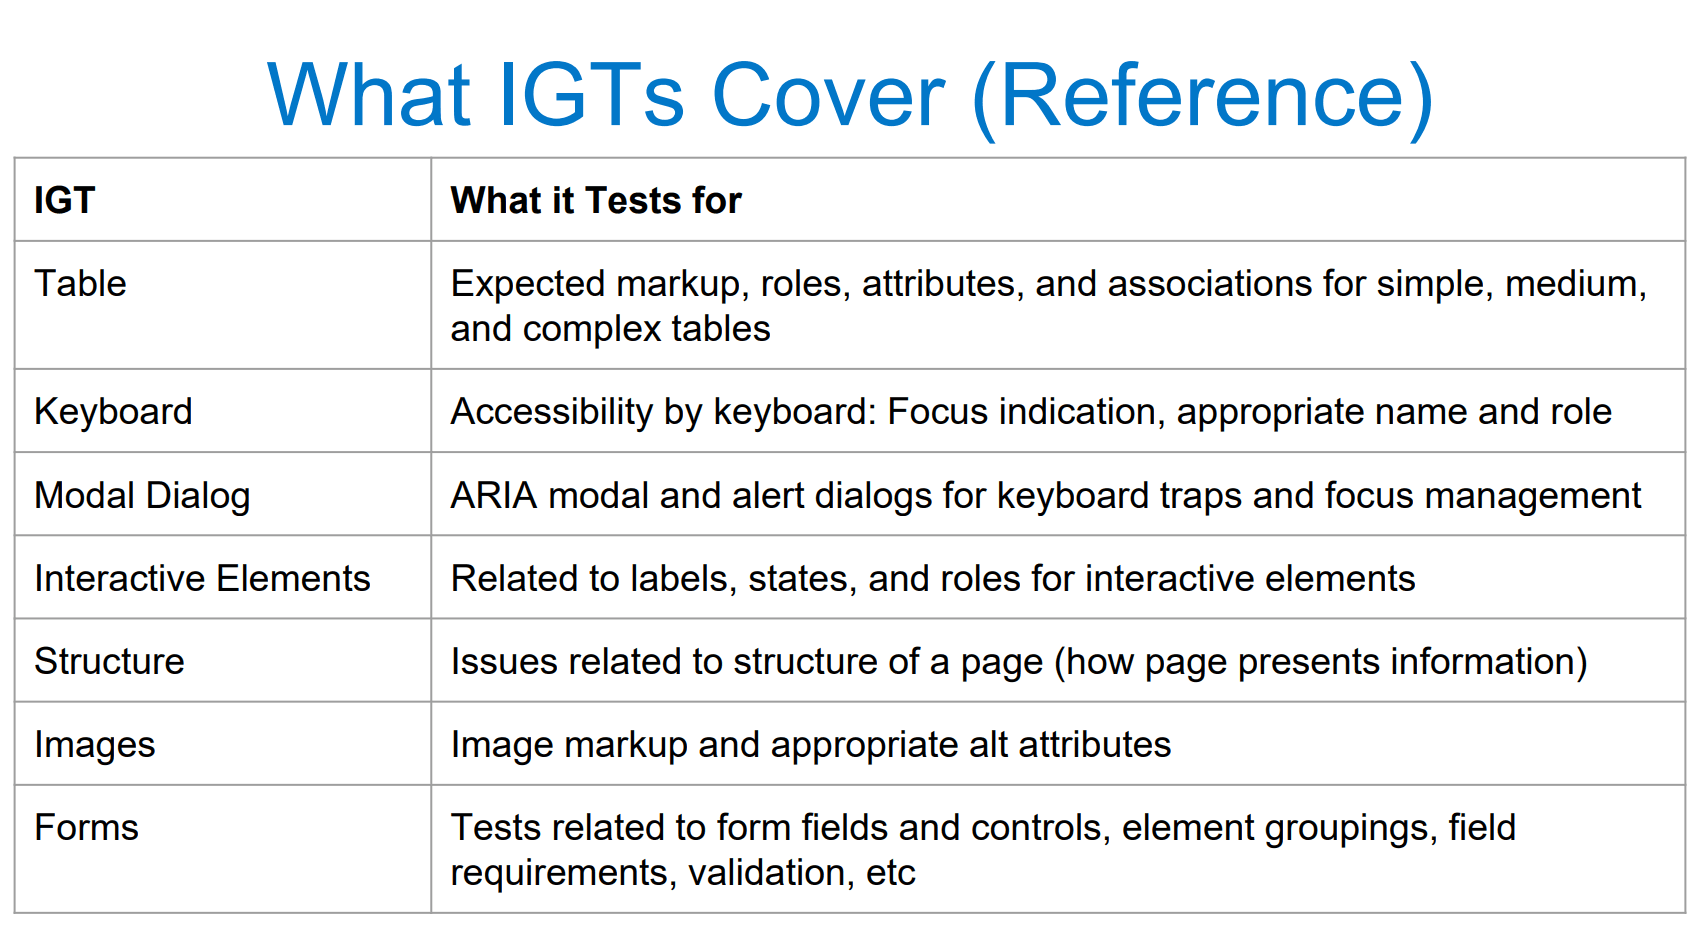 A table describing what intelligent guided tests cover